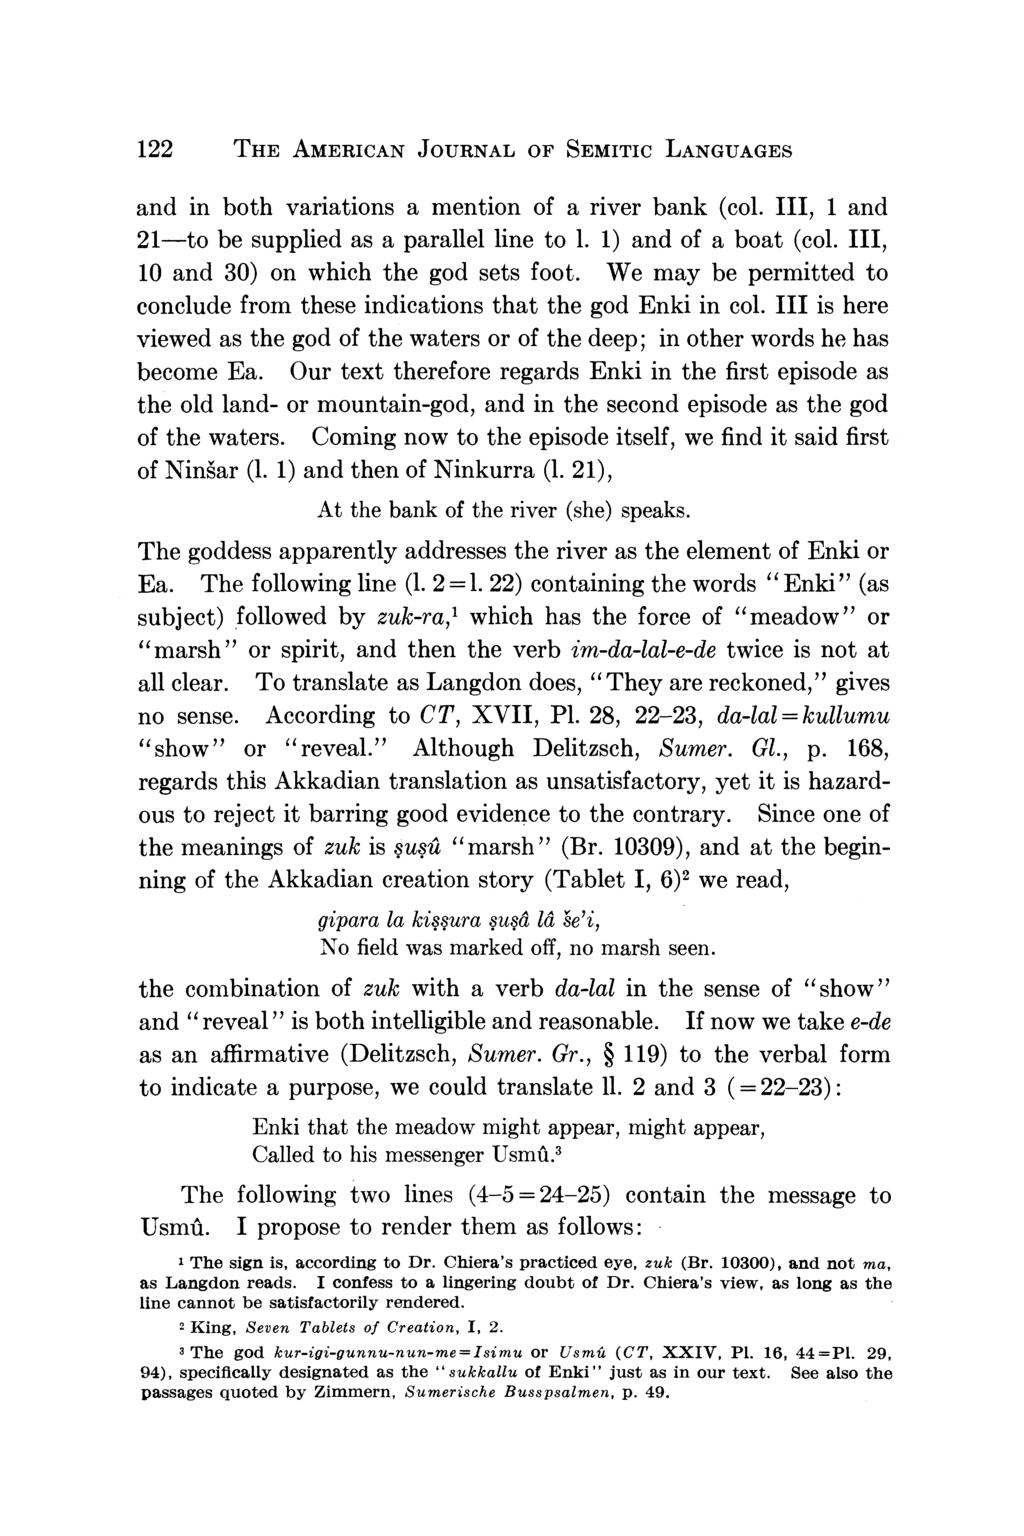 122 THE AMERICAN JOURNAL OF SEMITIC LANGUAGES and in both variations a mention of a river bank (col. III, 1 and 21-to be supplied as a parallel line to 1. 1) and of a boat (col.